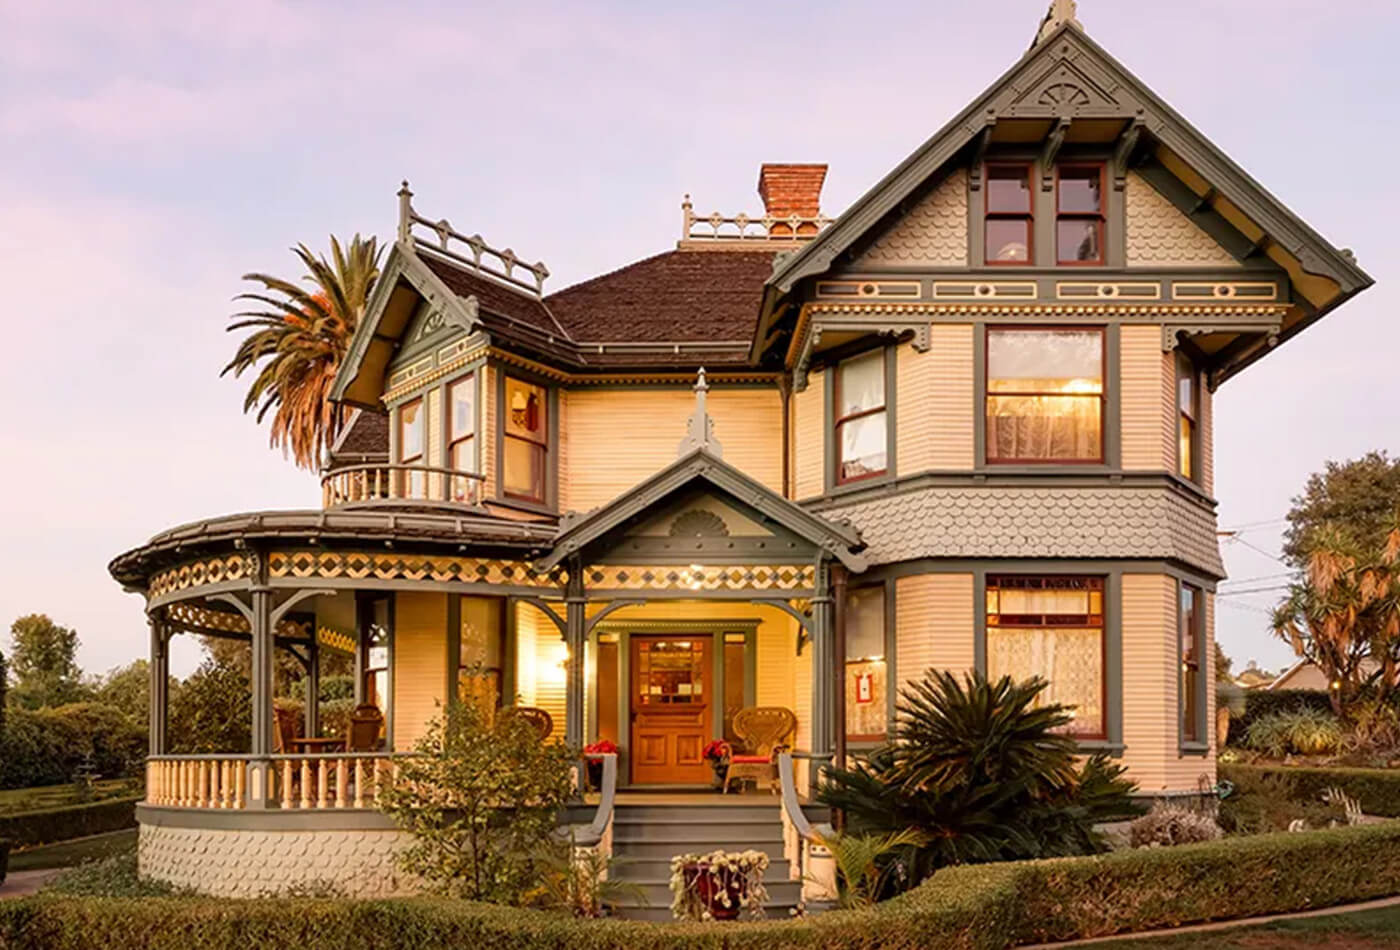 Victorian Style Home